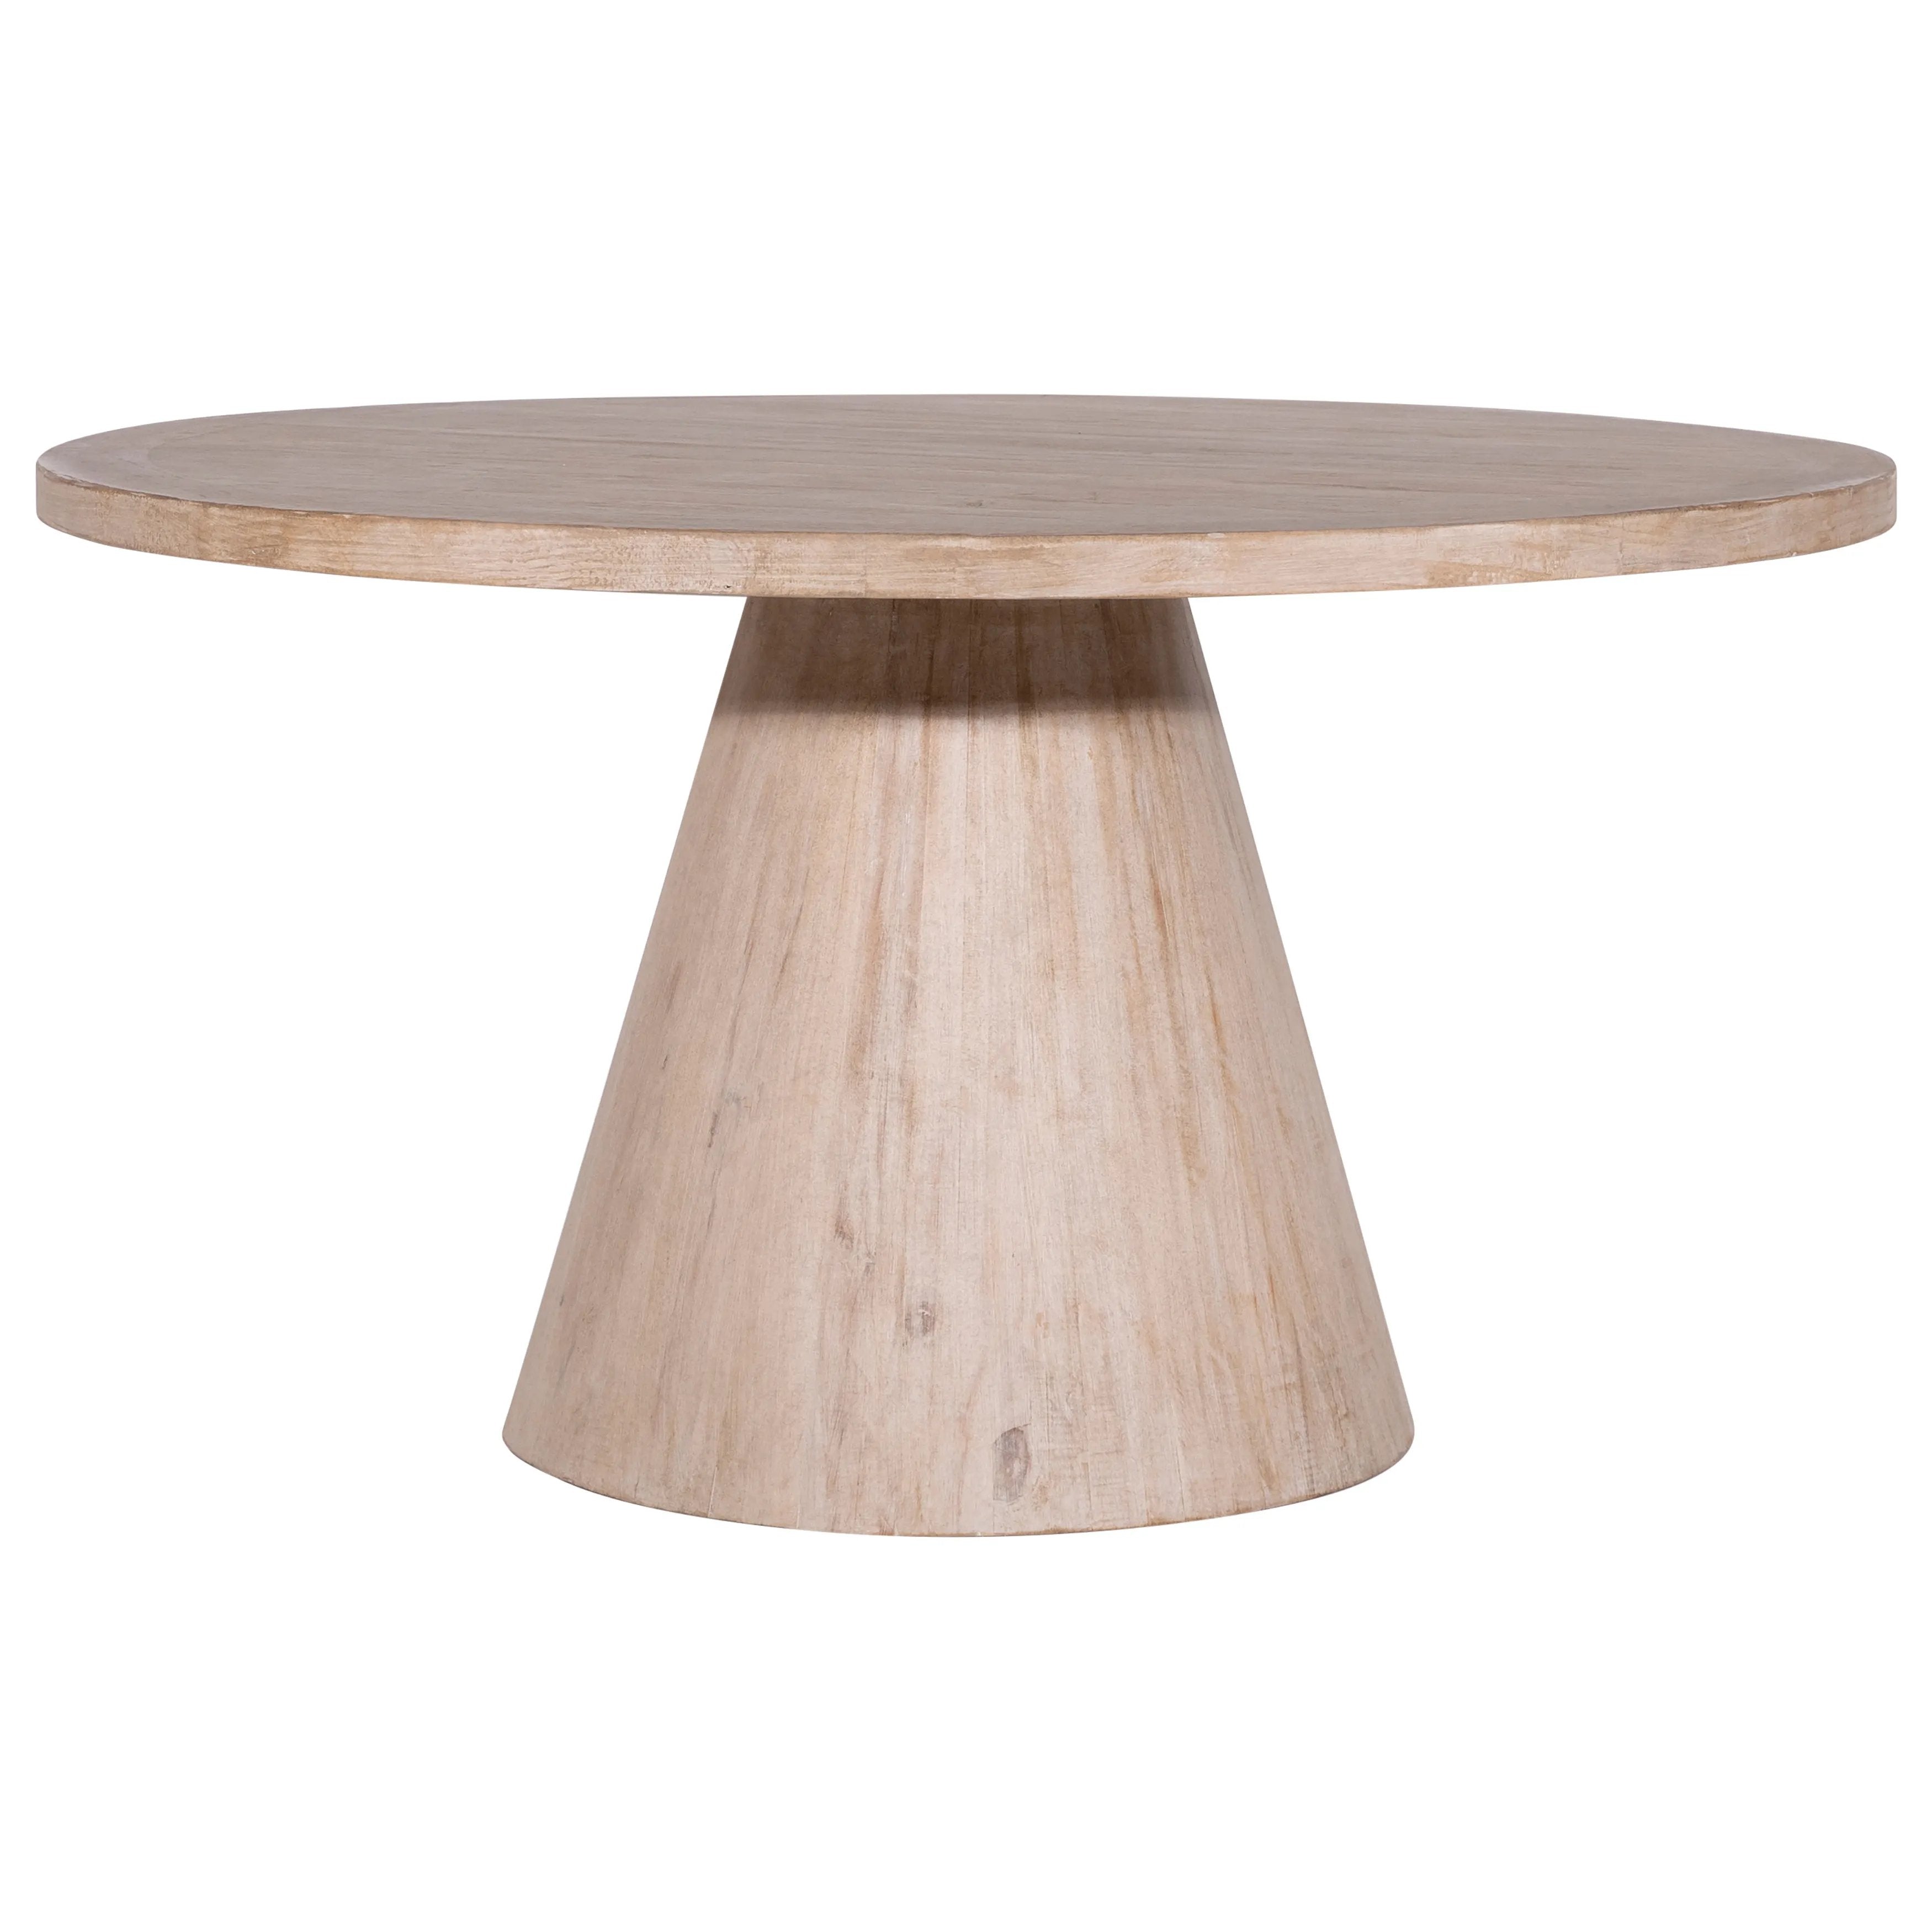 Crafted from reclaimed pine wood, featuring a round shape on a sturdy cone-shaped base that lends to a unique modern silhouette. This 55” round dining table features a light warm wash finish that works great for any style or décor, creating the perfect stage for an enjoyable dinner gathering. Amethyst Home provides interior design, new home construction design consulting, vintage area rugs, and lighting in the Boston metro area.